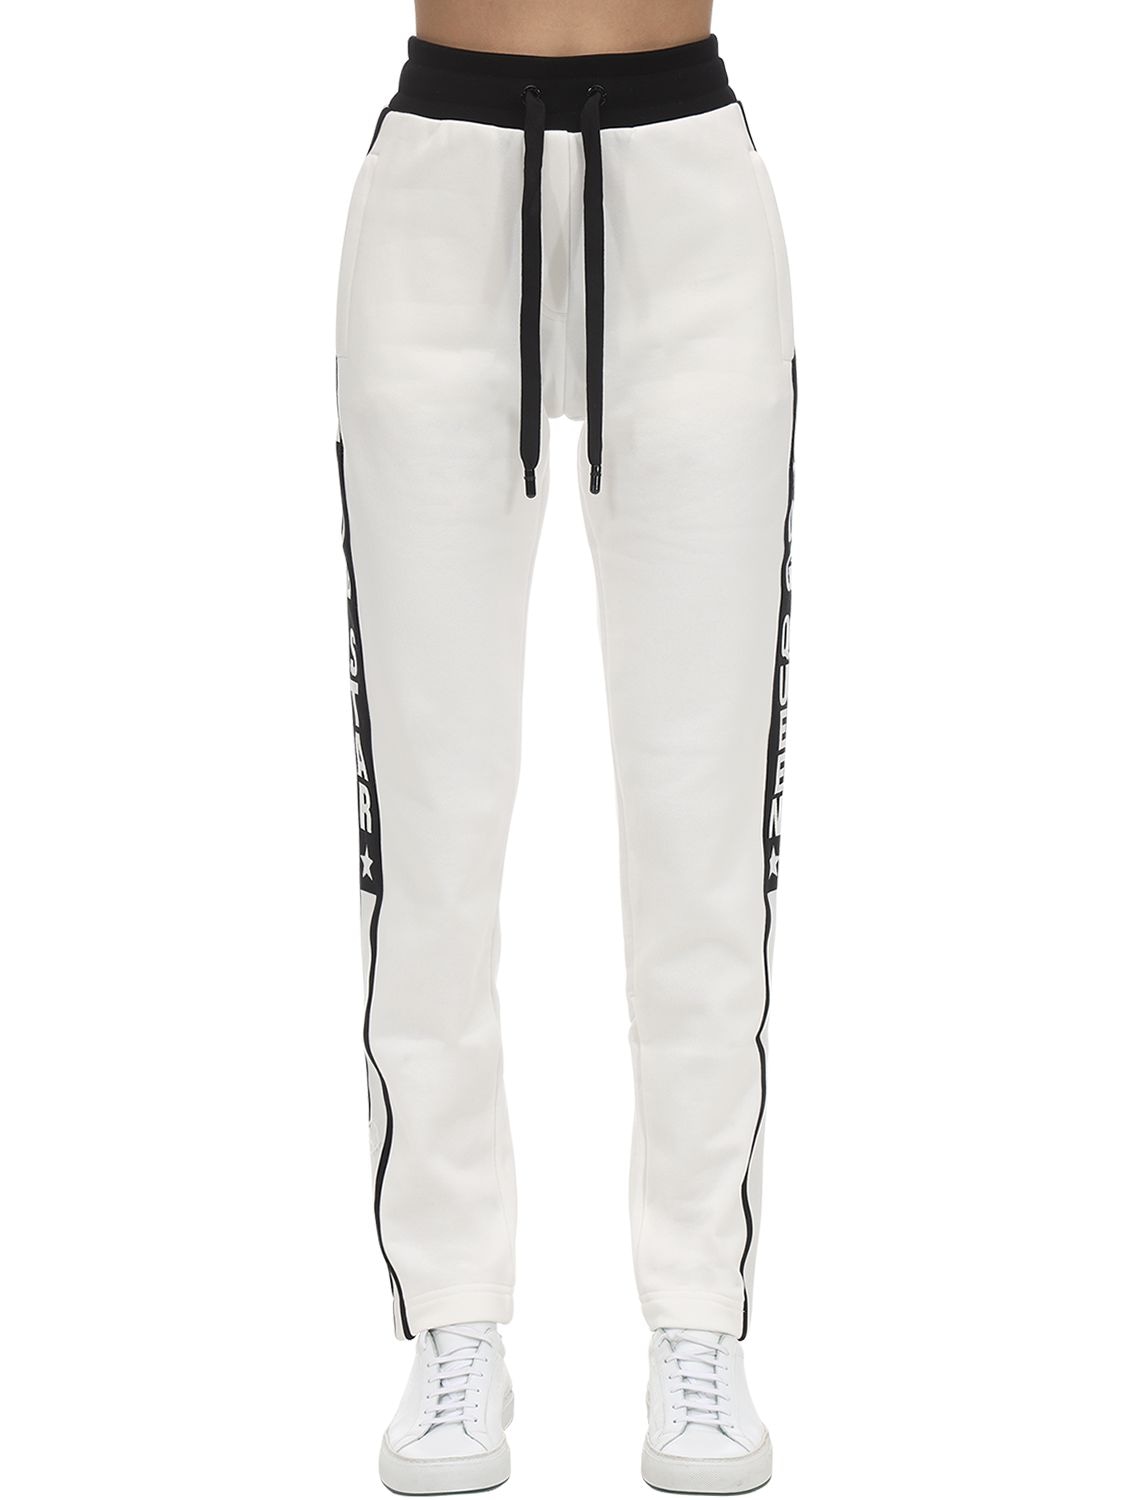 Dolce & Gabbana Cotton Jersey Track Pants W/side Bands In Black & White